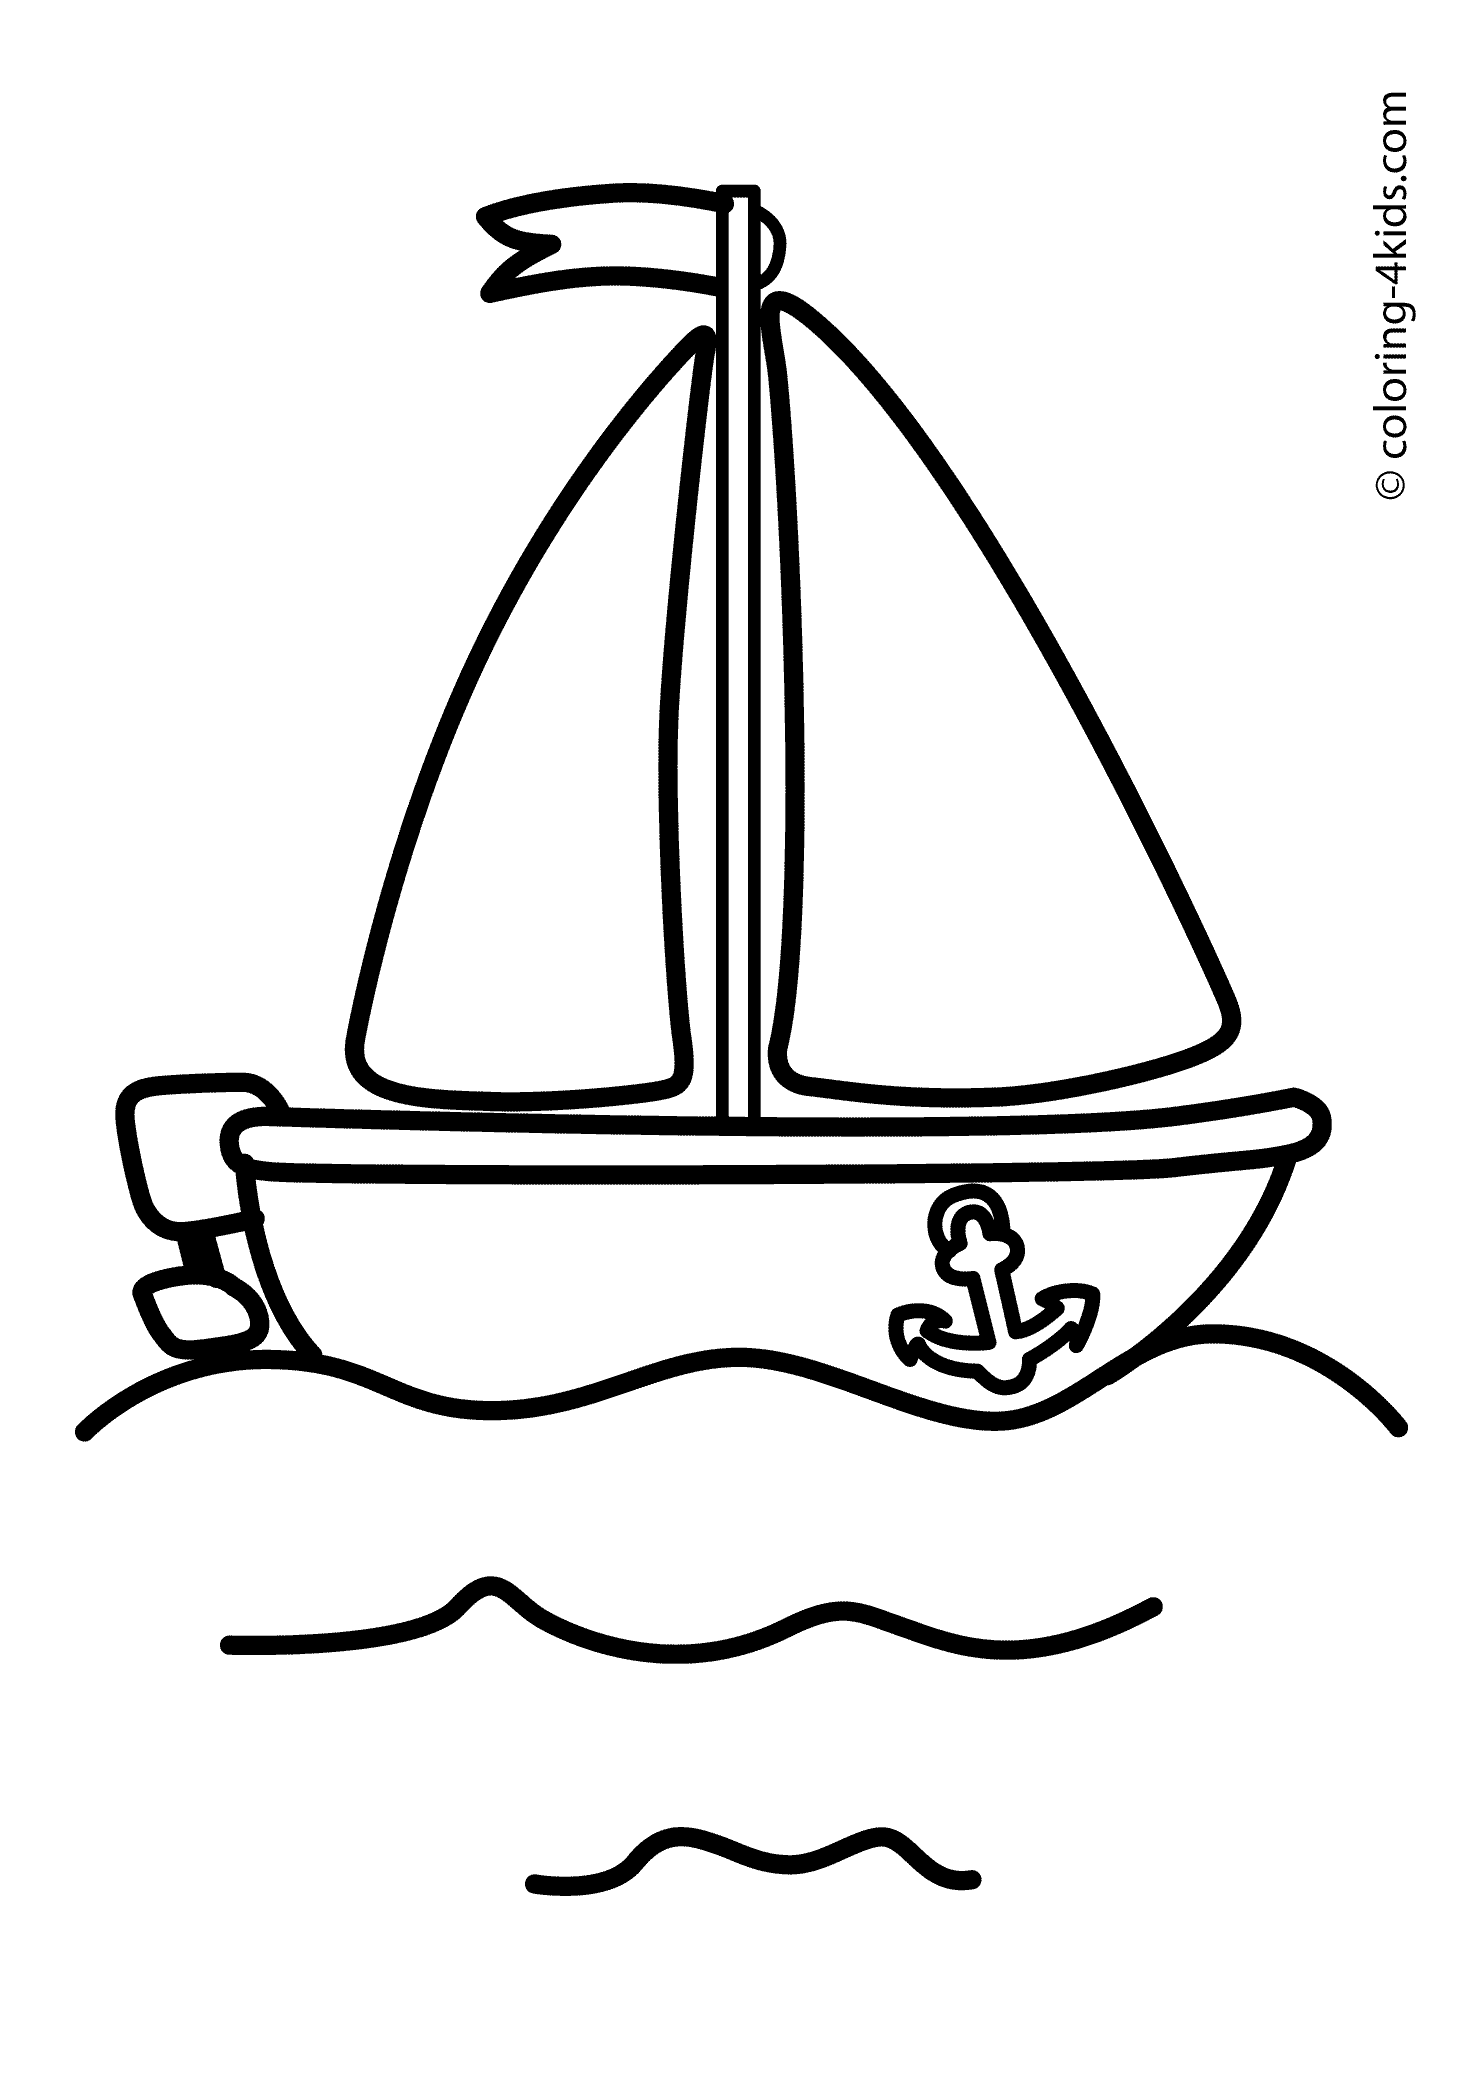 boat-ship-transportation-free-printable-coloring-pages